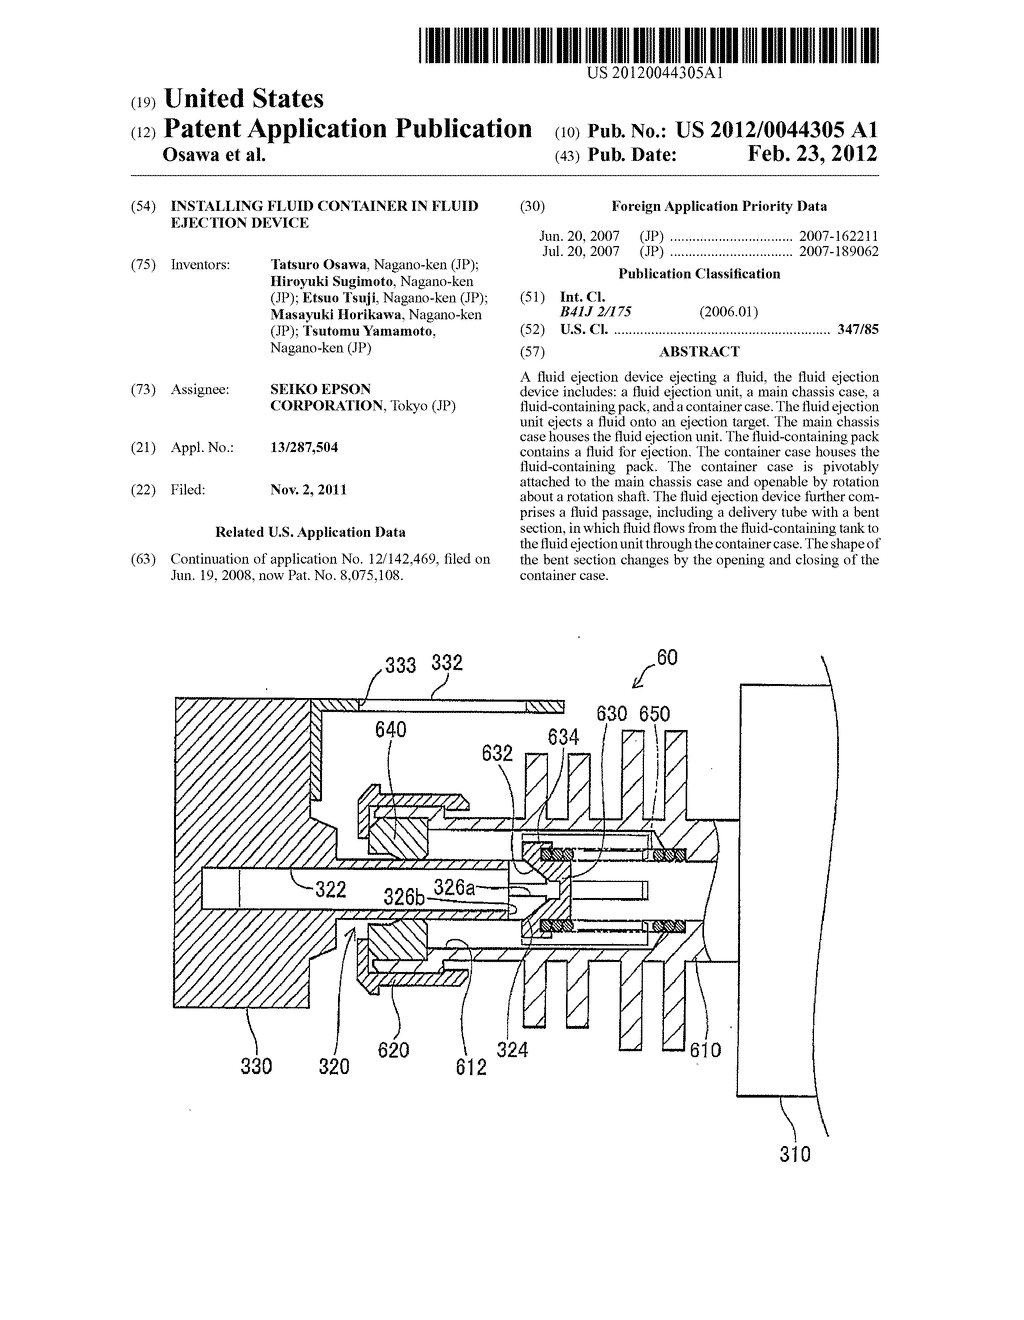 Installing Fluid Container in Fluid Ejection Device - diagram, schematic, and image 01